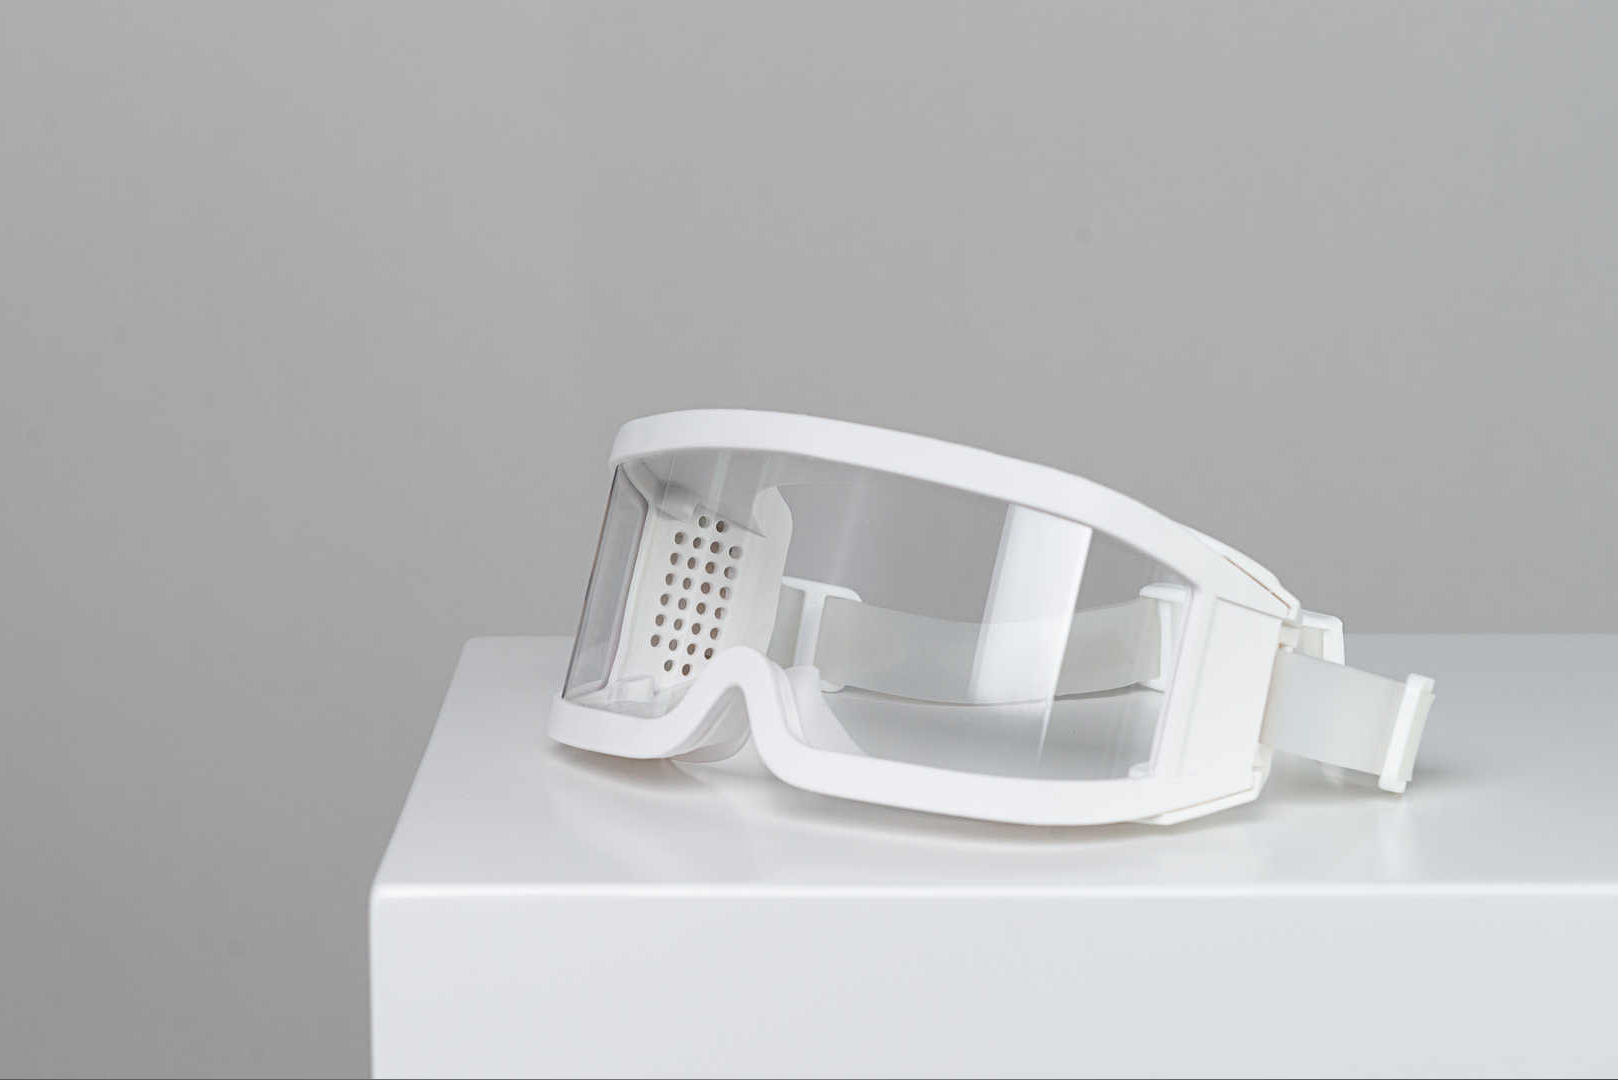 Medical isolation goggles